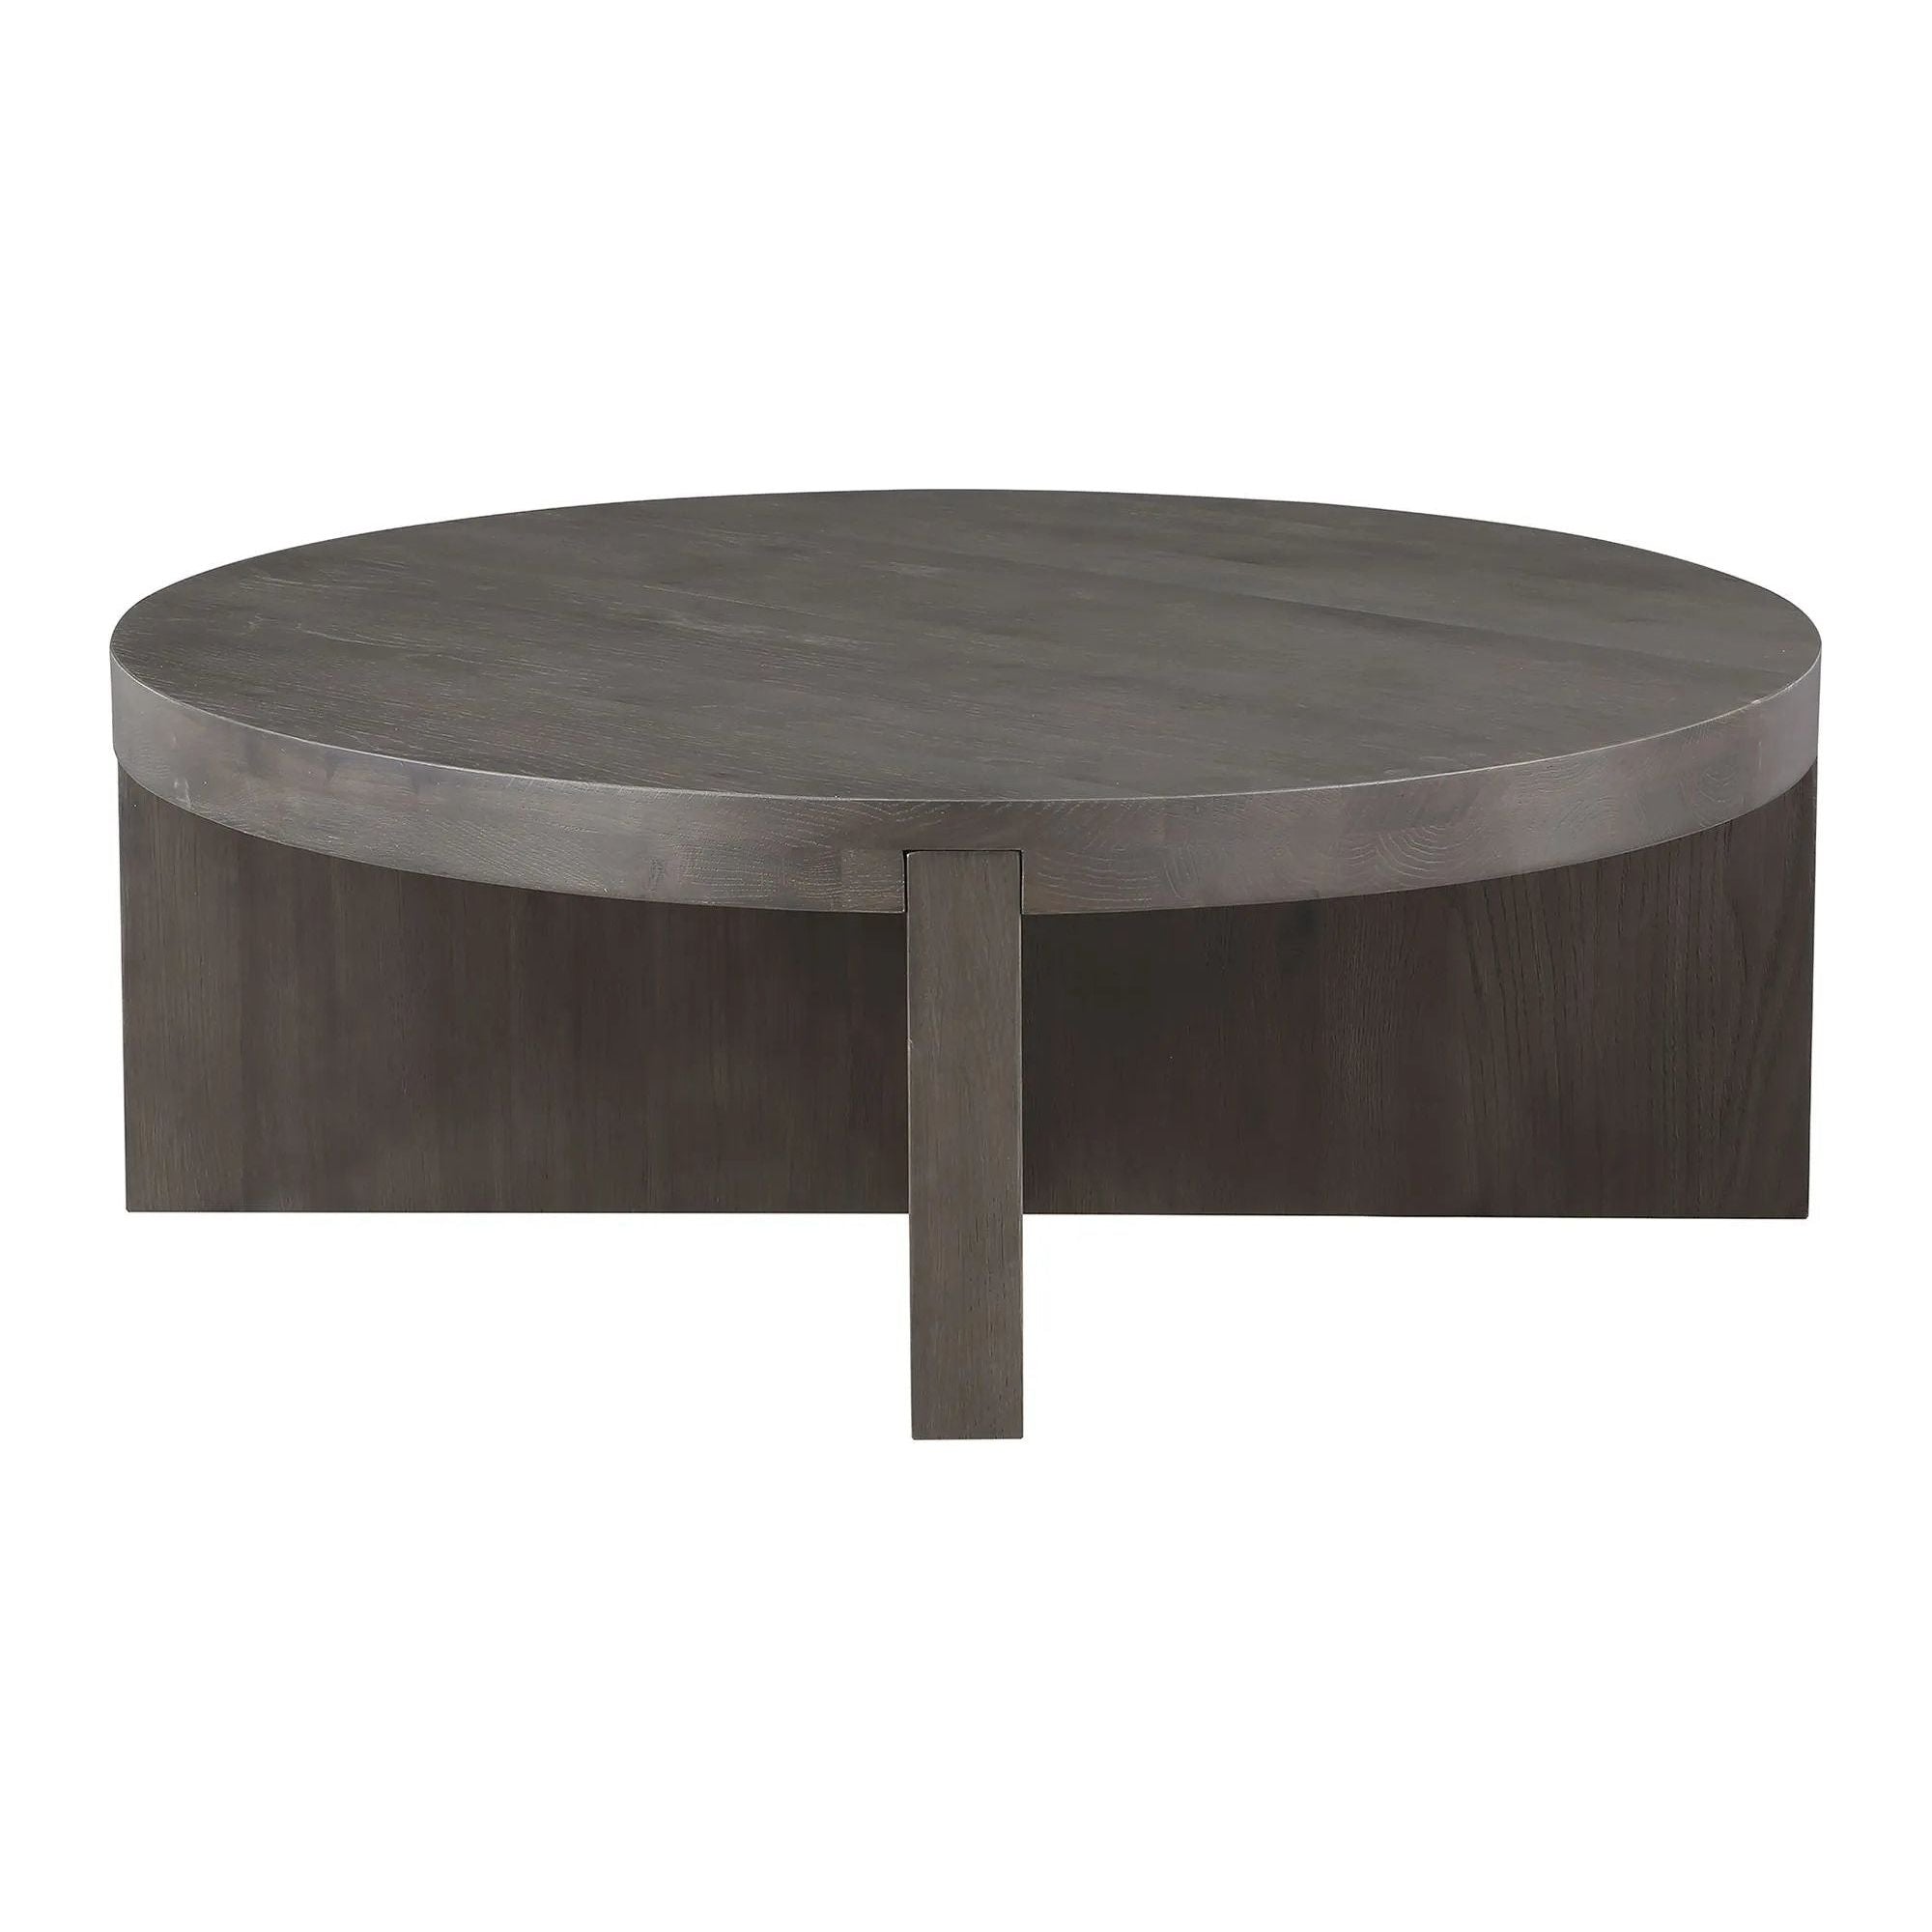 Bringing new levels of connection to interior living, the Folke round coffee table is a showcase of nature’s majesty. Entirely constructed from solid brown oak, the individual components of this piece are beautifully shaped and joined, coming together in absolute harmony. Natural woodgrain and artisanal craft make Folke an all-natural standout Amethyst Home provides interior design, new home construction design consulting, vintage area rugs, and lighting in the Alpharetta metro area.